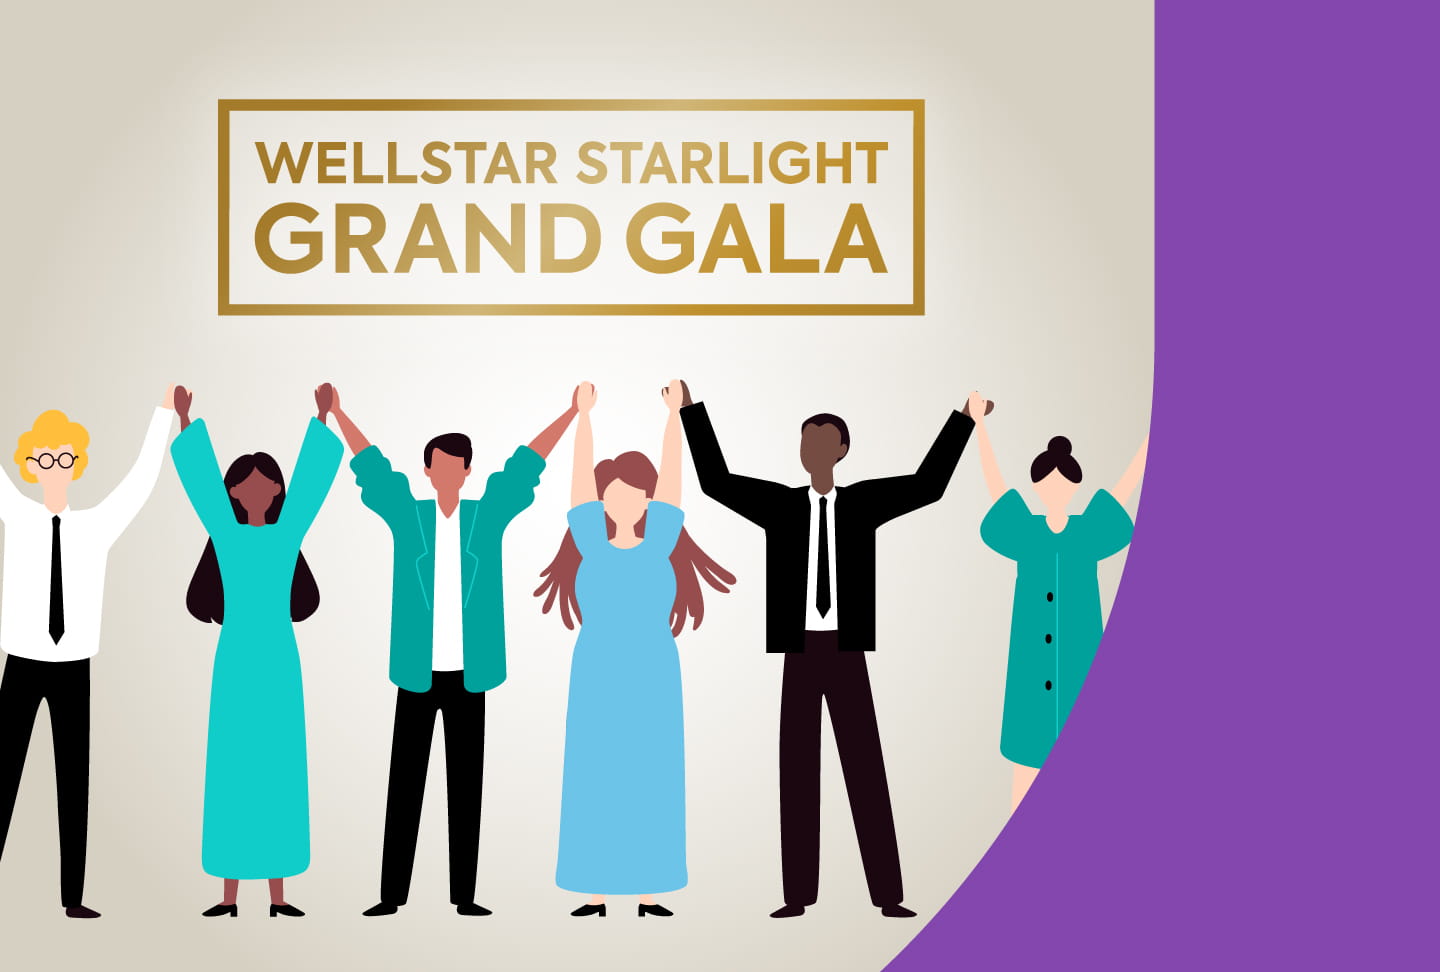 Illustration of people holding hands with hands raised. Text reads "Wellstar Starlight Grand Gala"